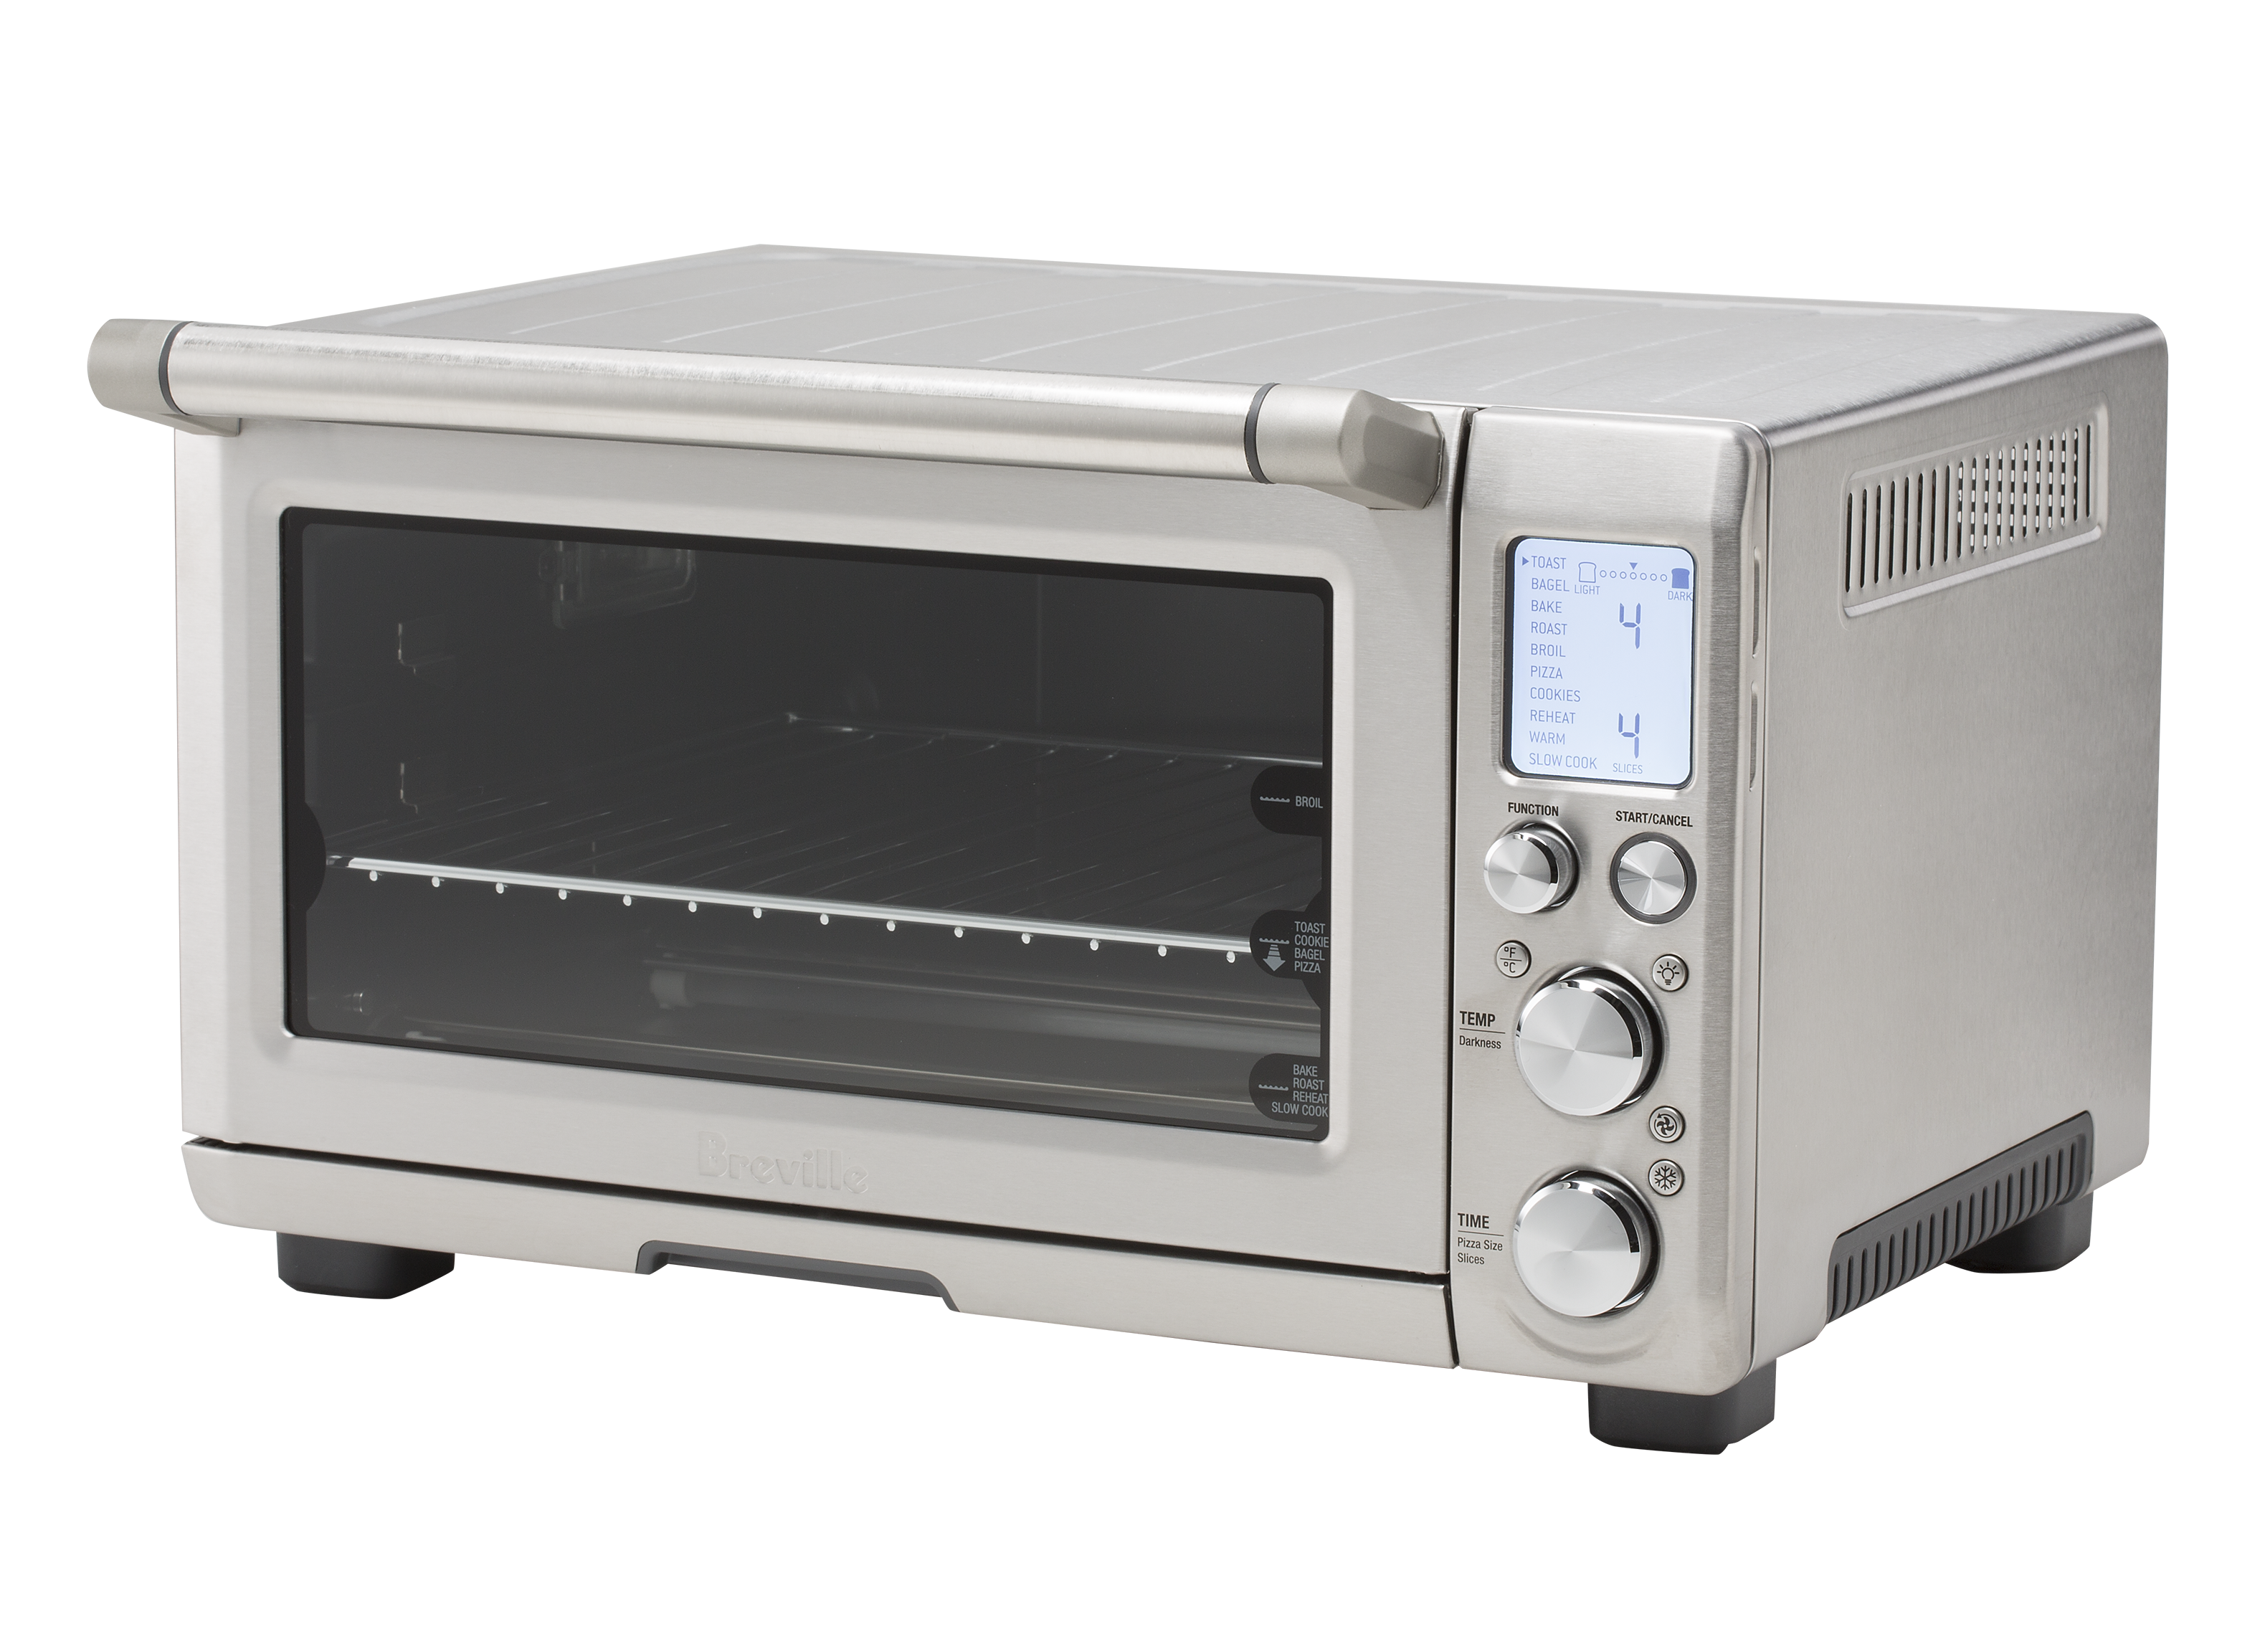 https://crdms.images.consumerreports.org/prod/products/cr/models/384788-toasterovens-breville-smartovenprobov845bss.png